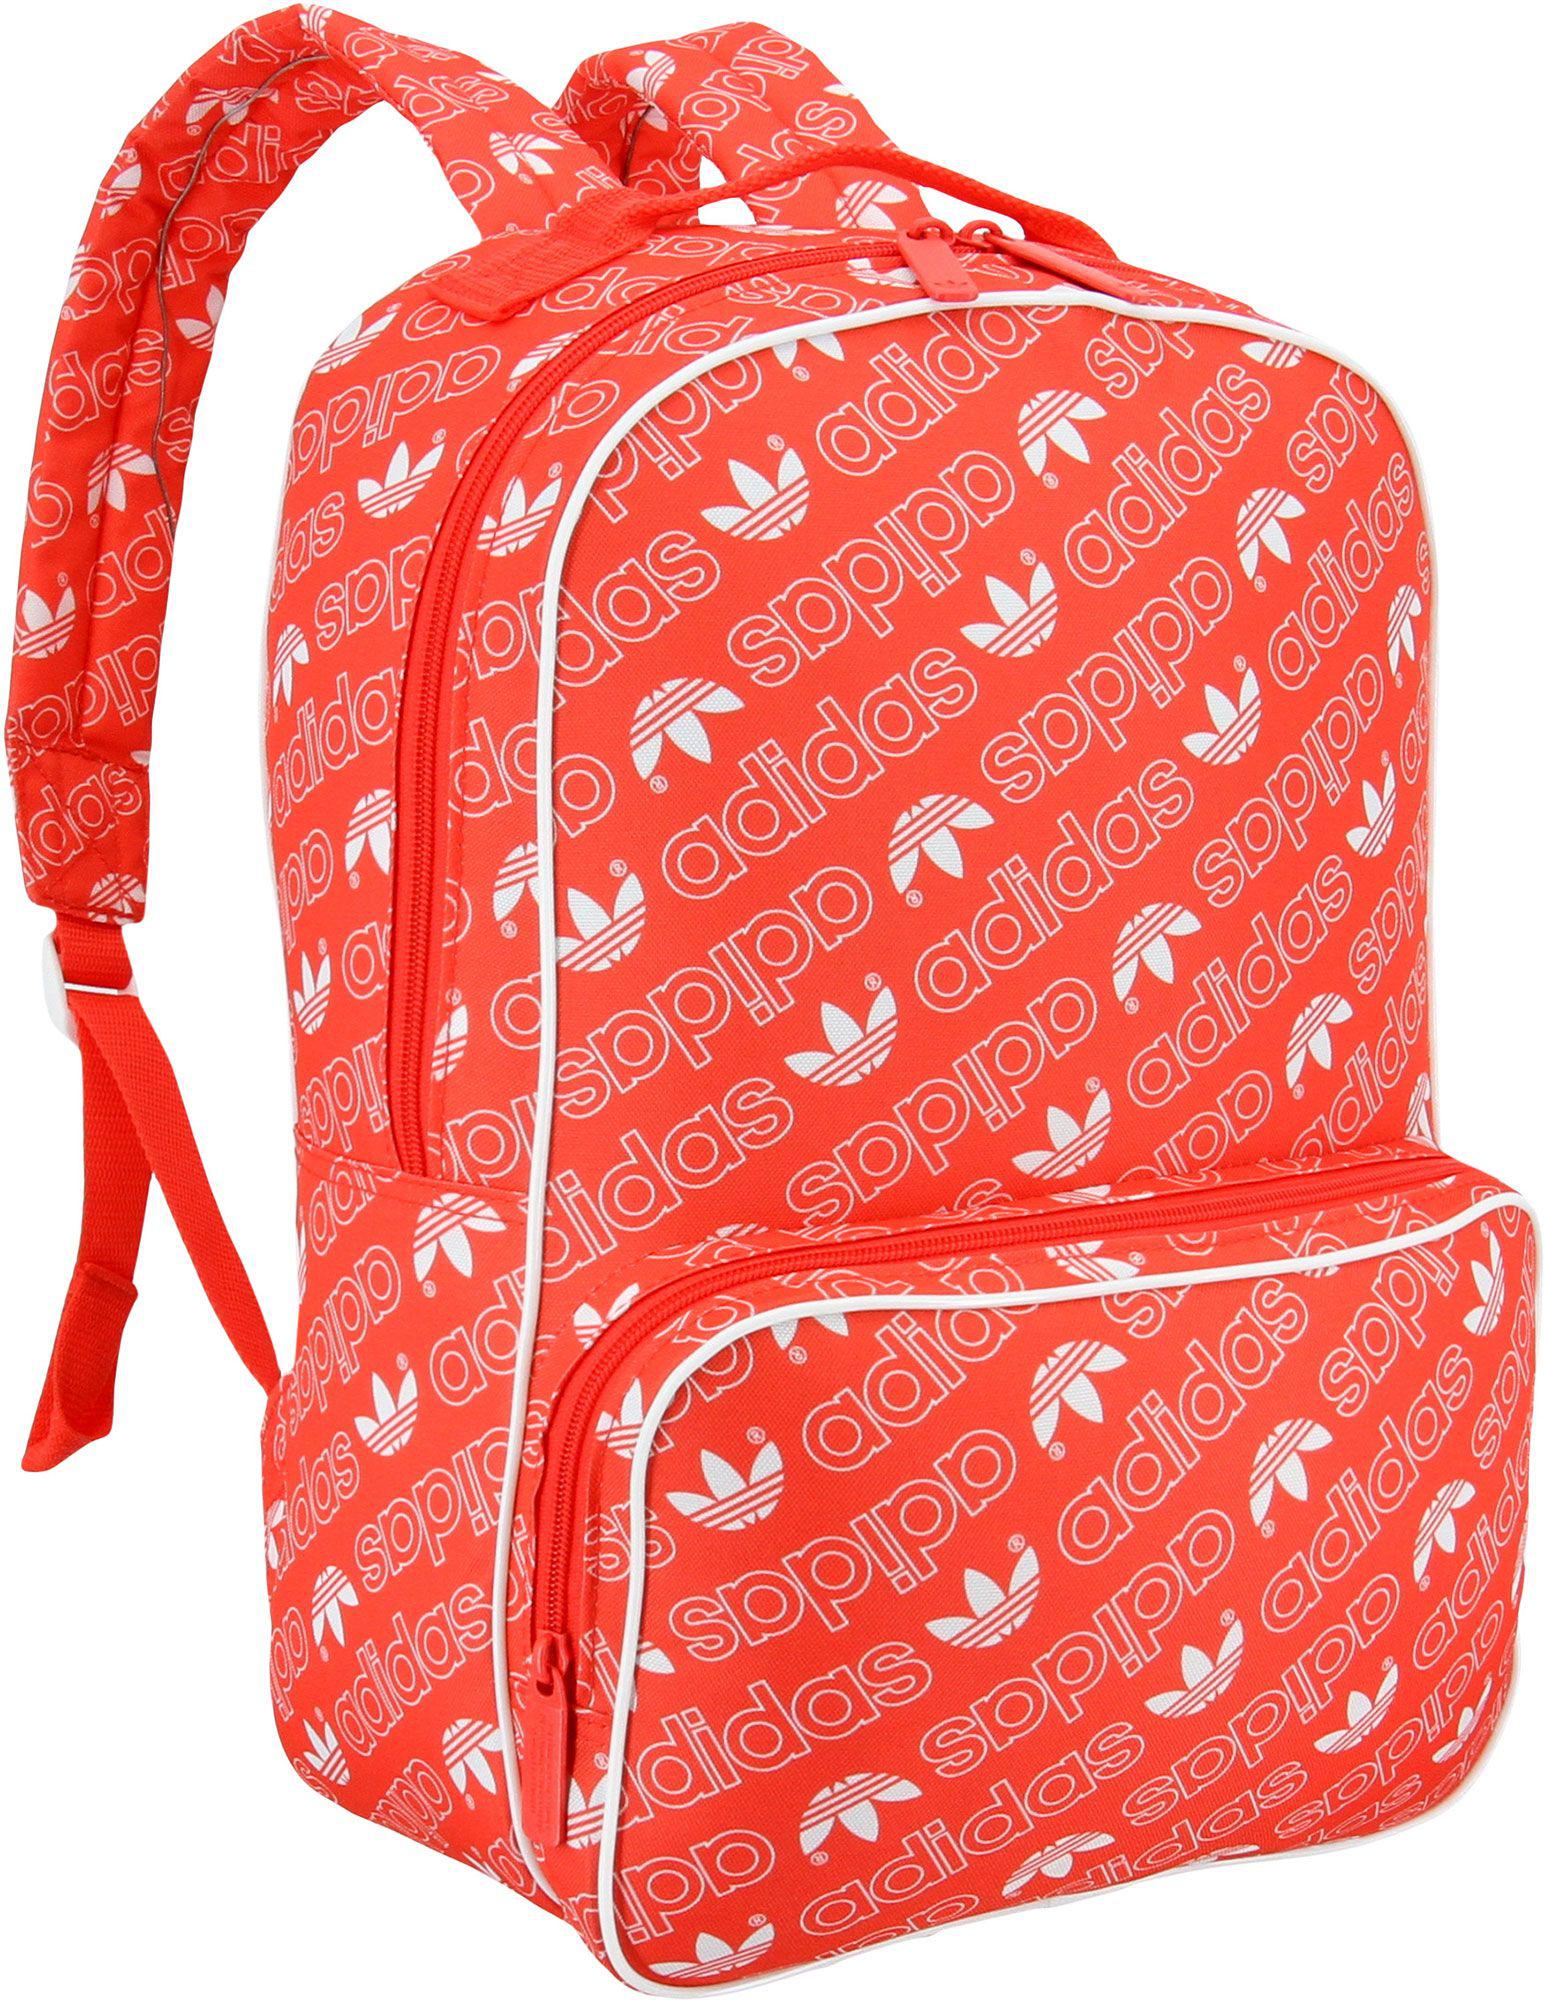 red and white adidas backpack